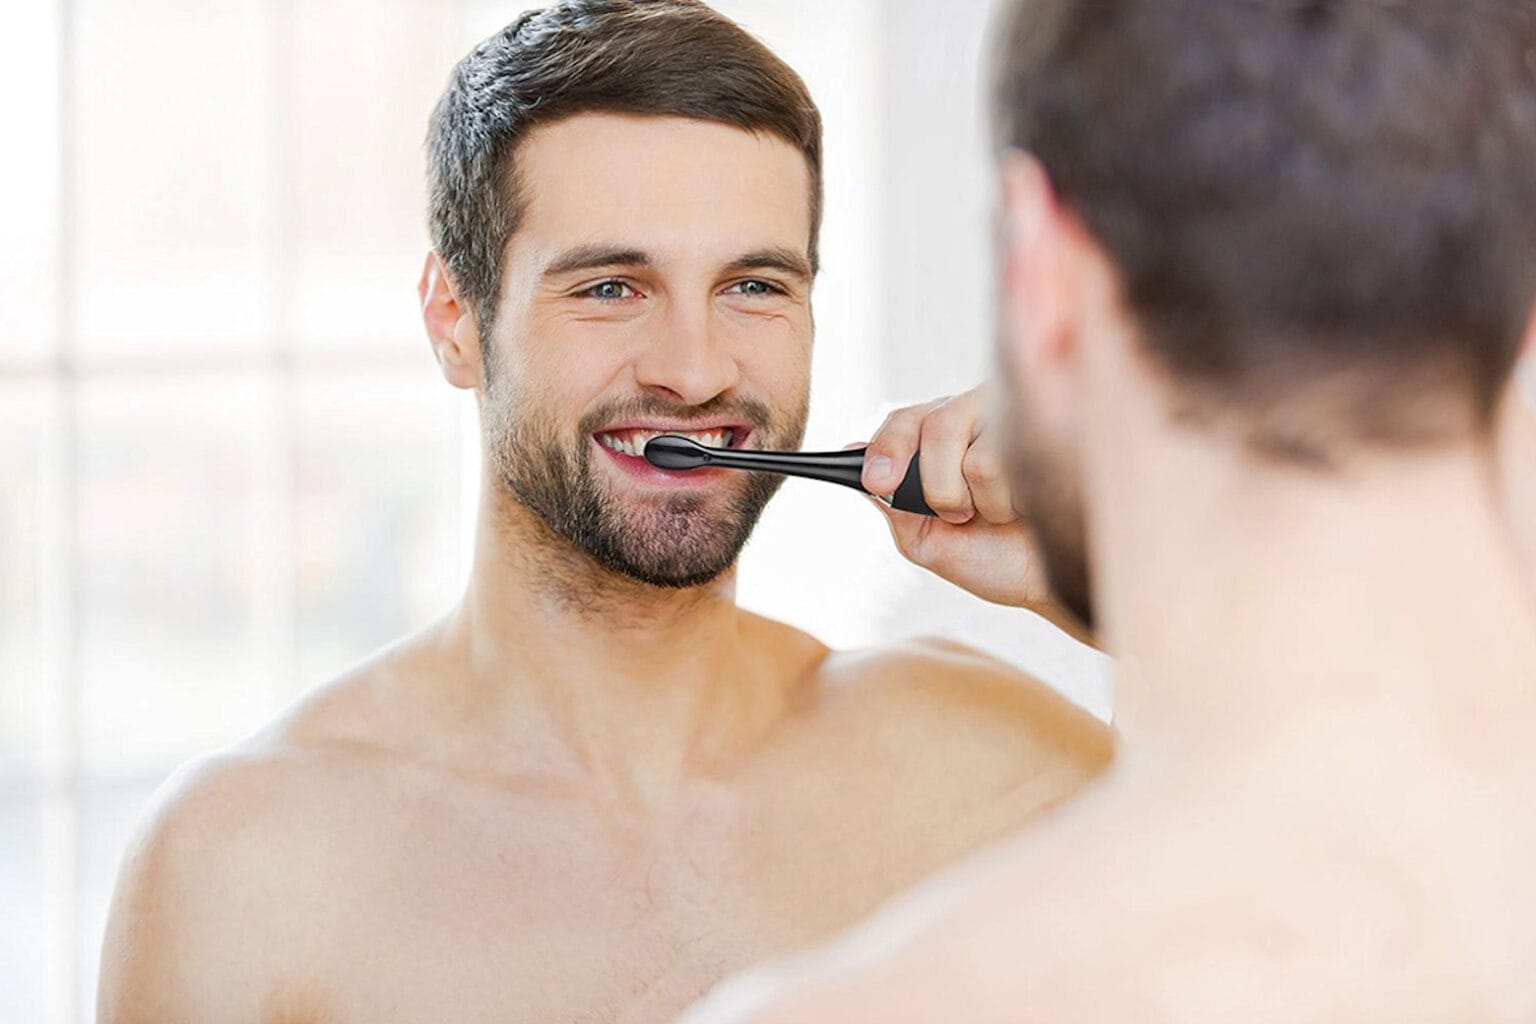 Save big on this deep-cleaning electric toothbrush, now $29.99.